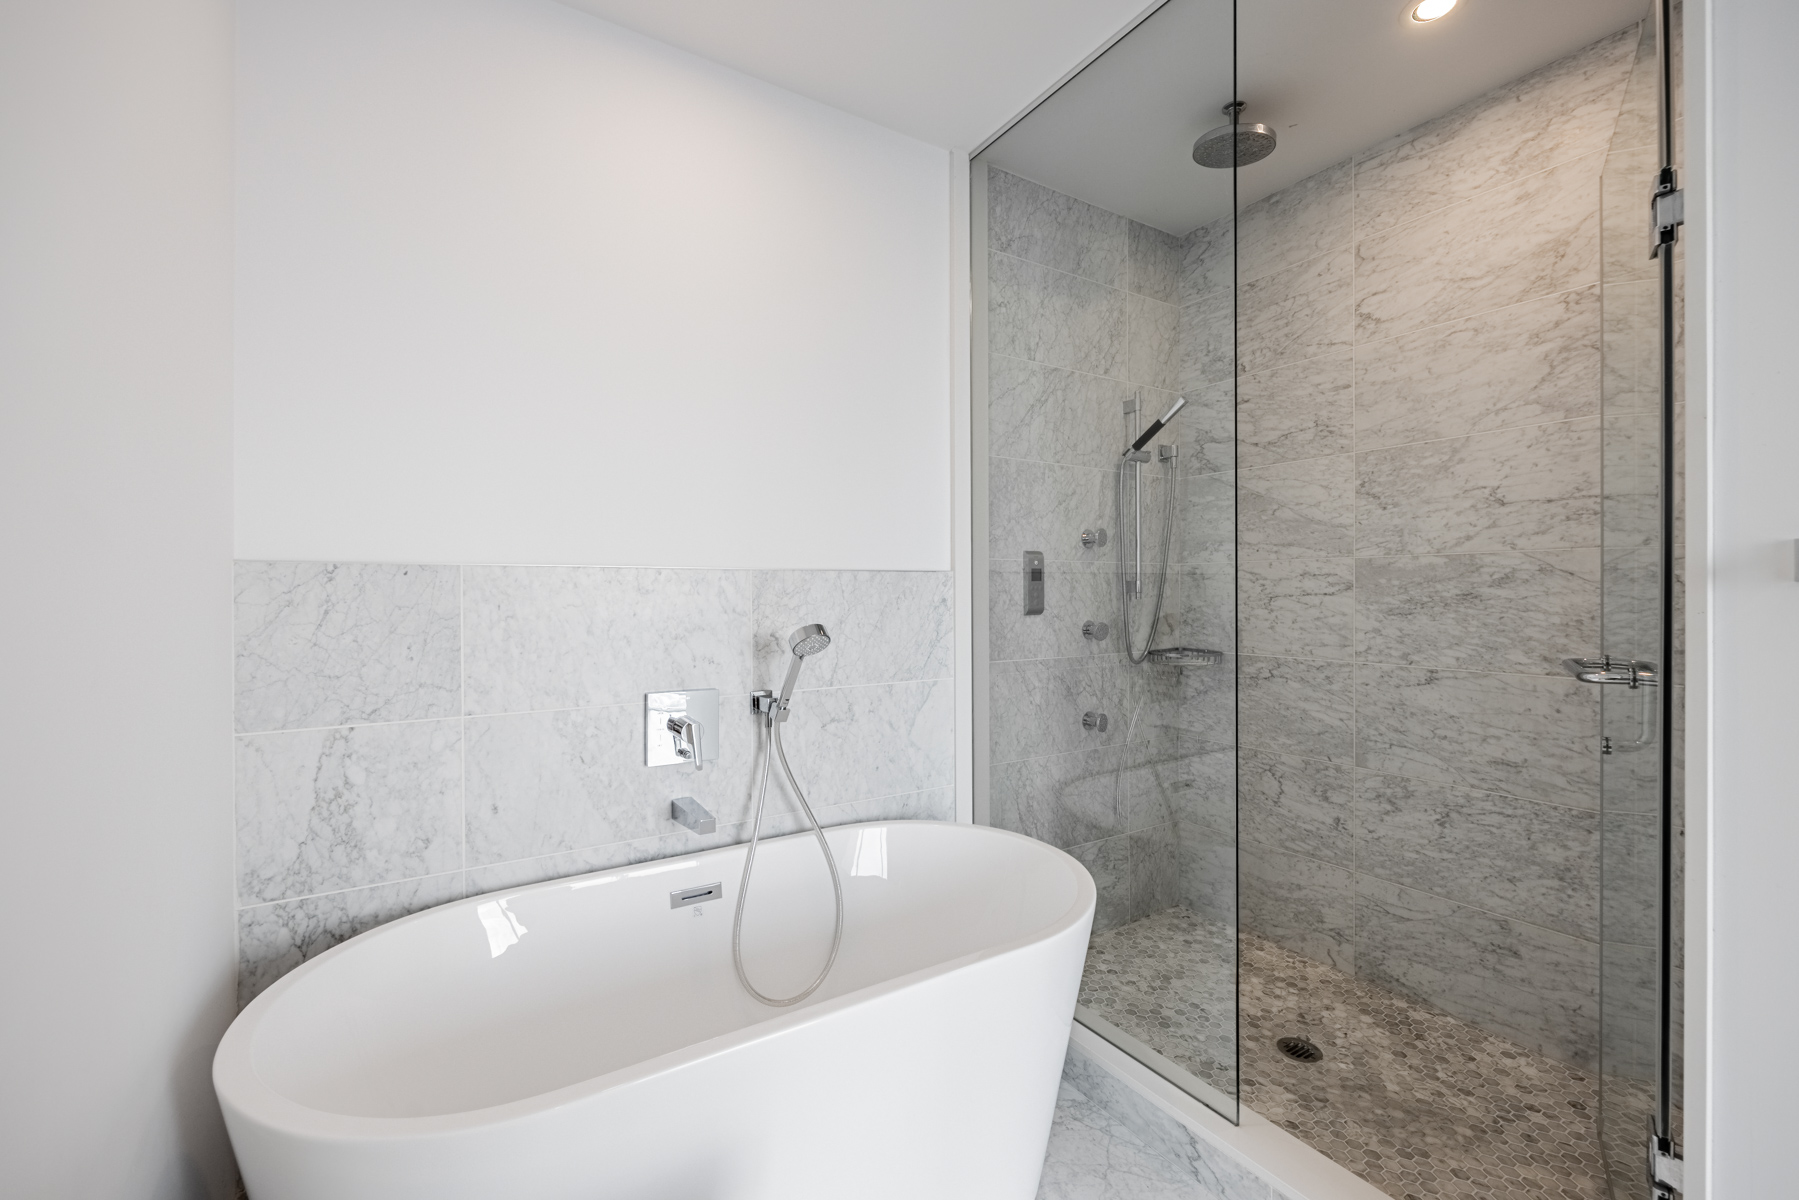 Condo bathroom with freestanding soaker tub and frameless glass shower with stone tiles.